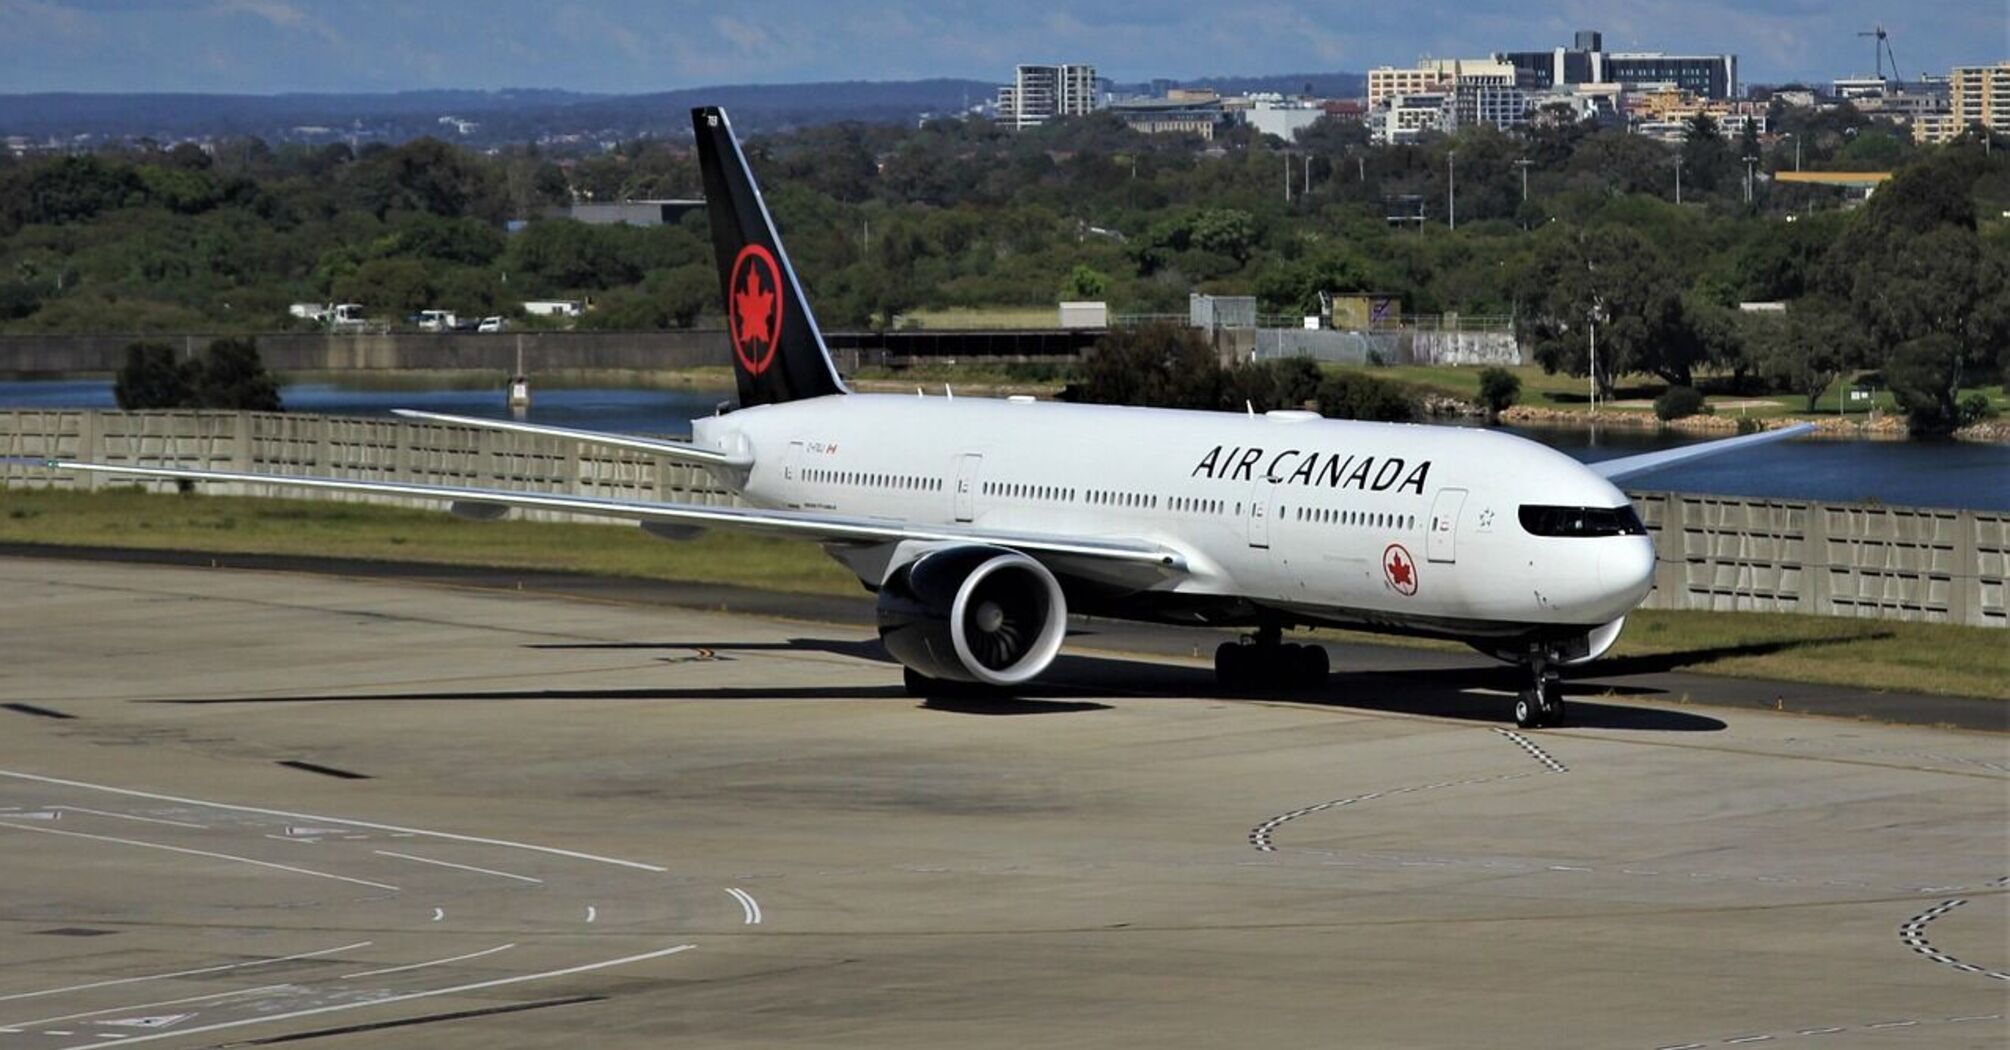 A 16-year-old passenger assaulted a family member on board an Air Canada flight, forcing the crew to make an unscheduled landing